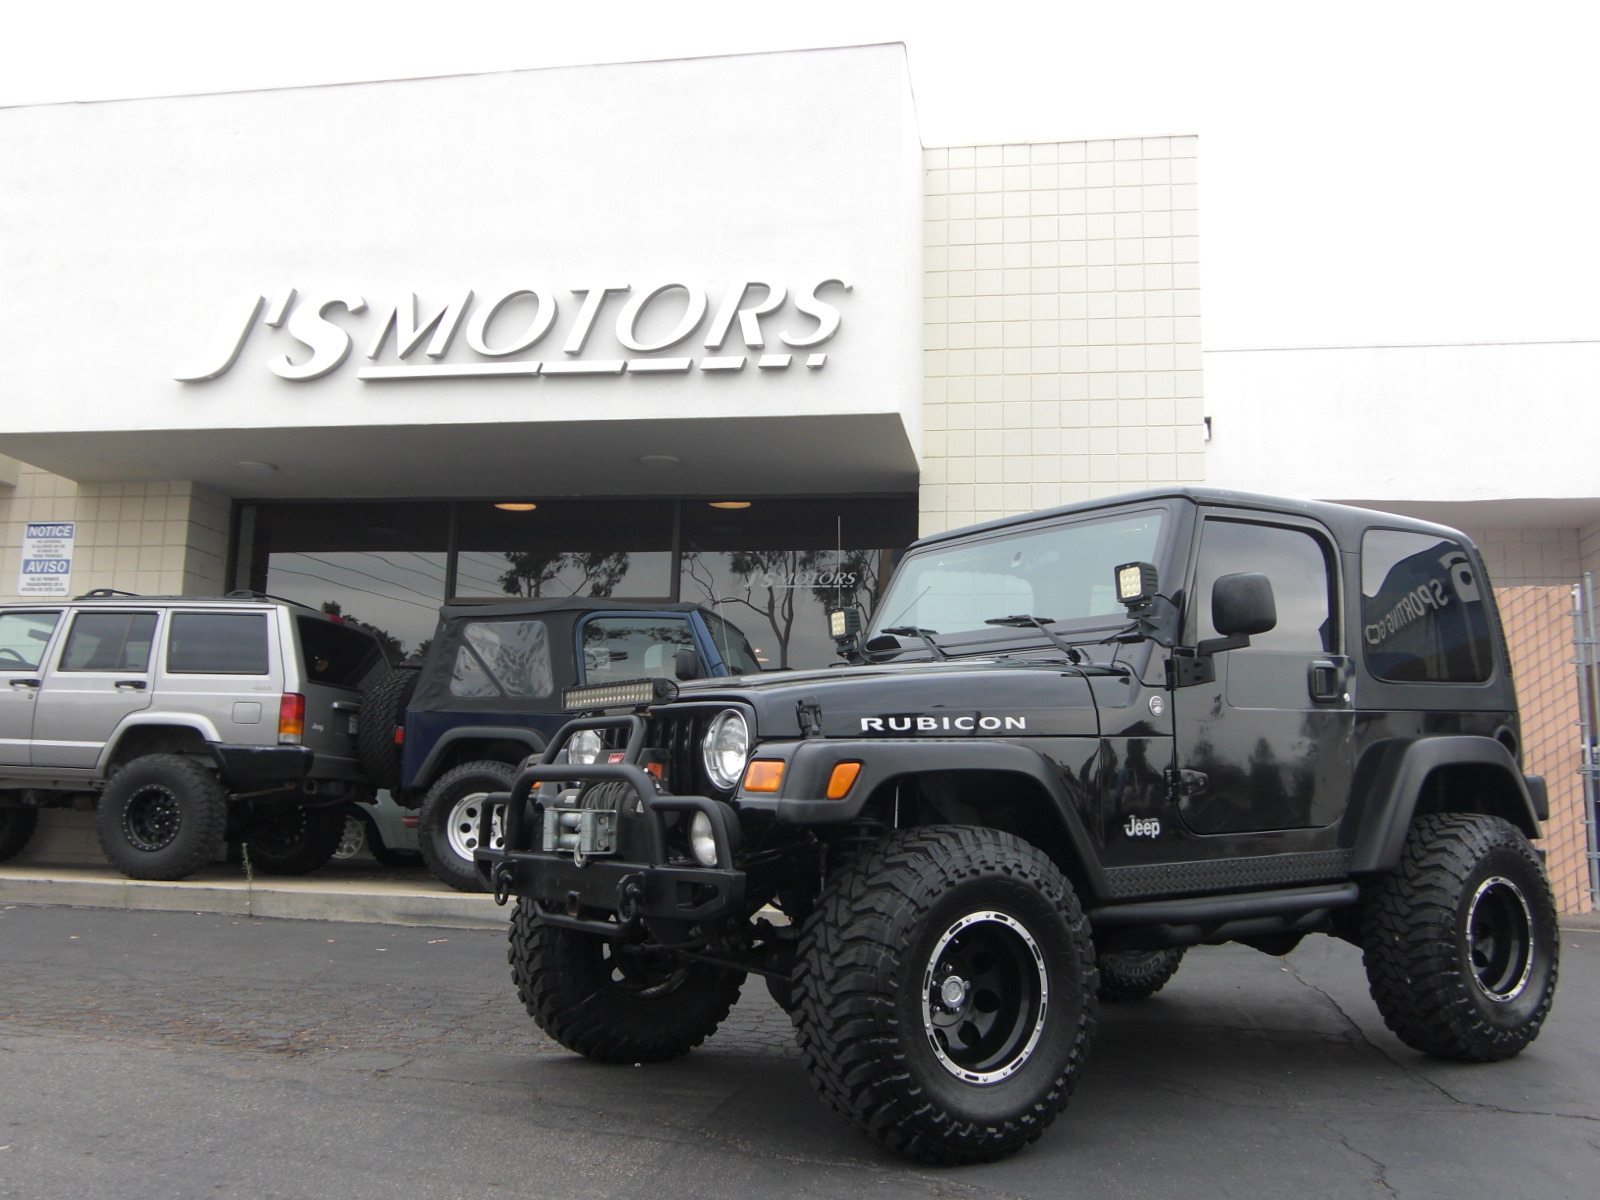 Used Jeep Wrangler Rubicon for Sale Near Me in San Diego, CA - Autotrader